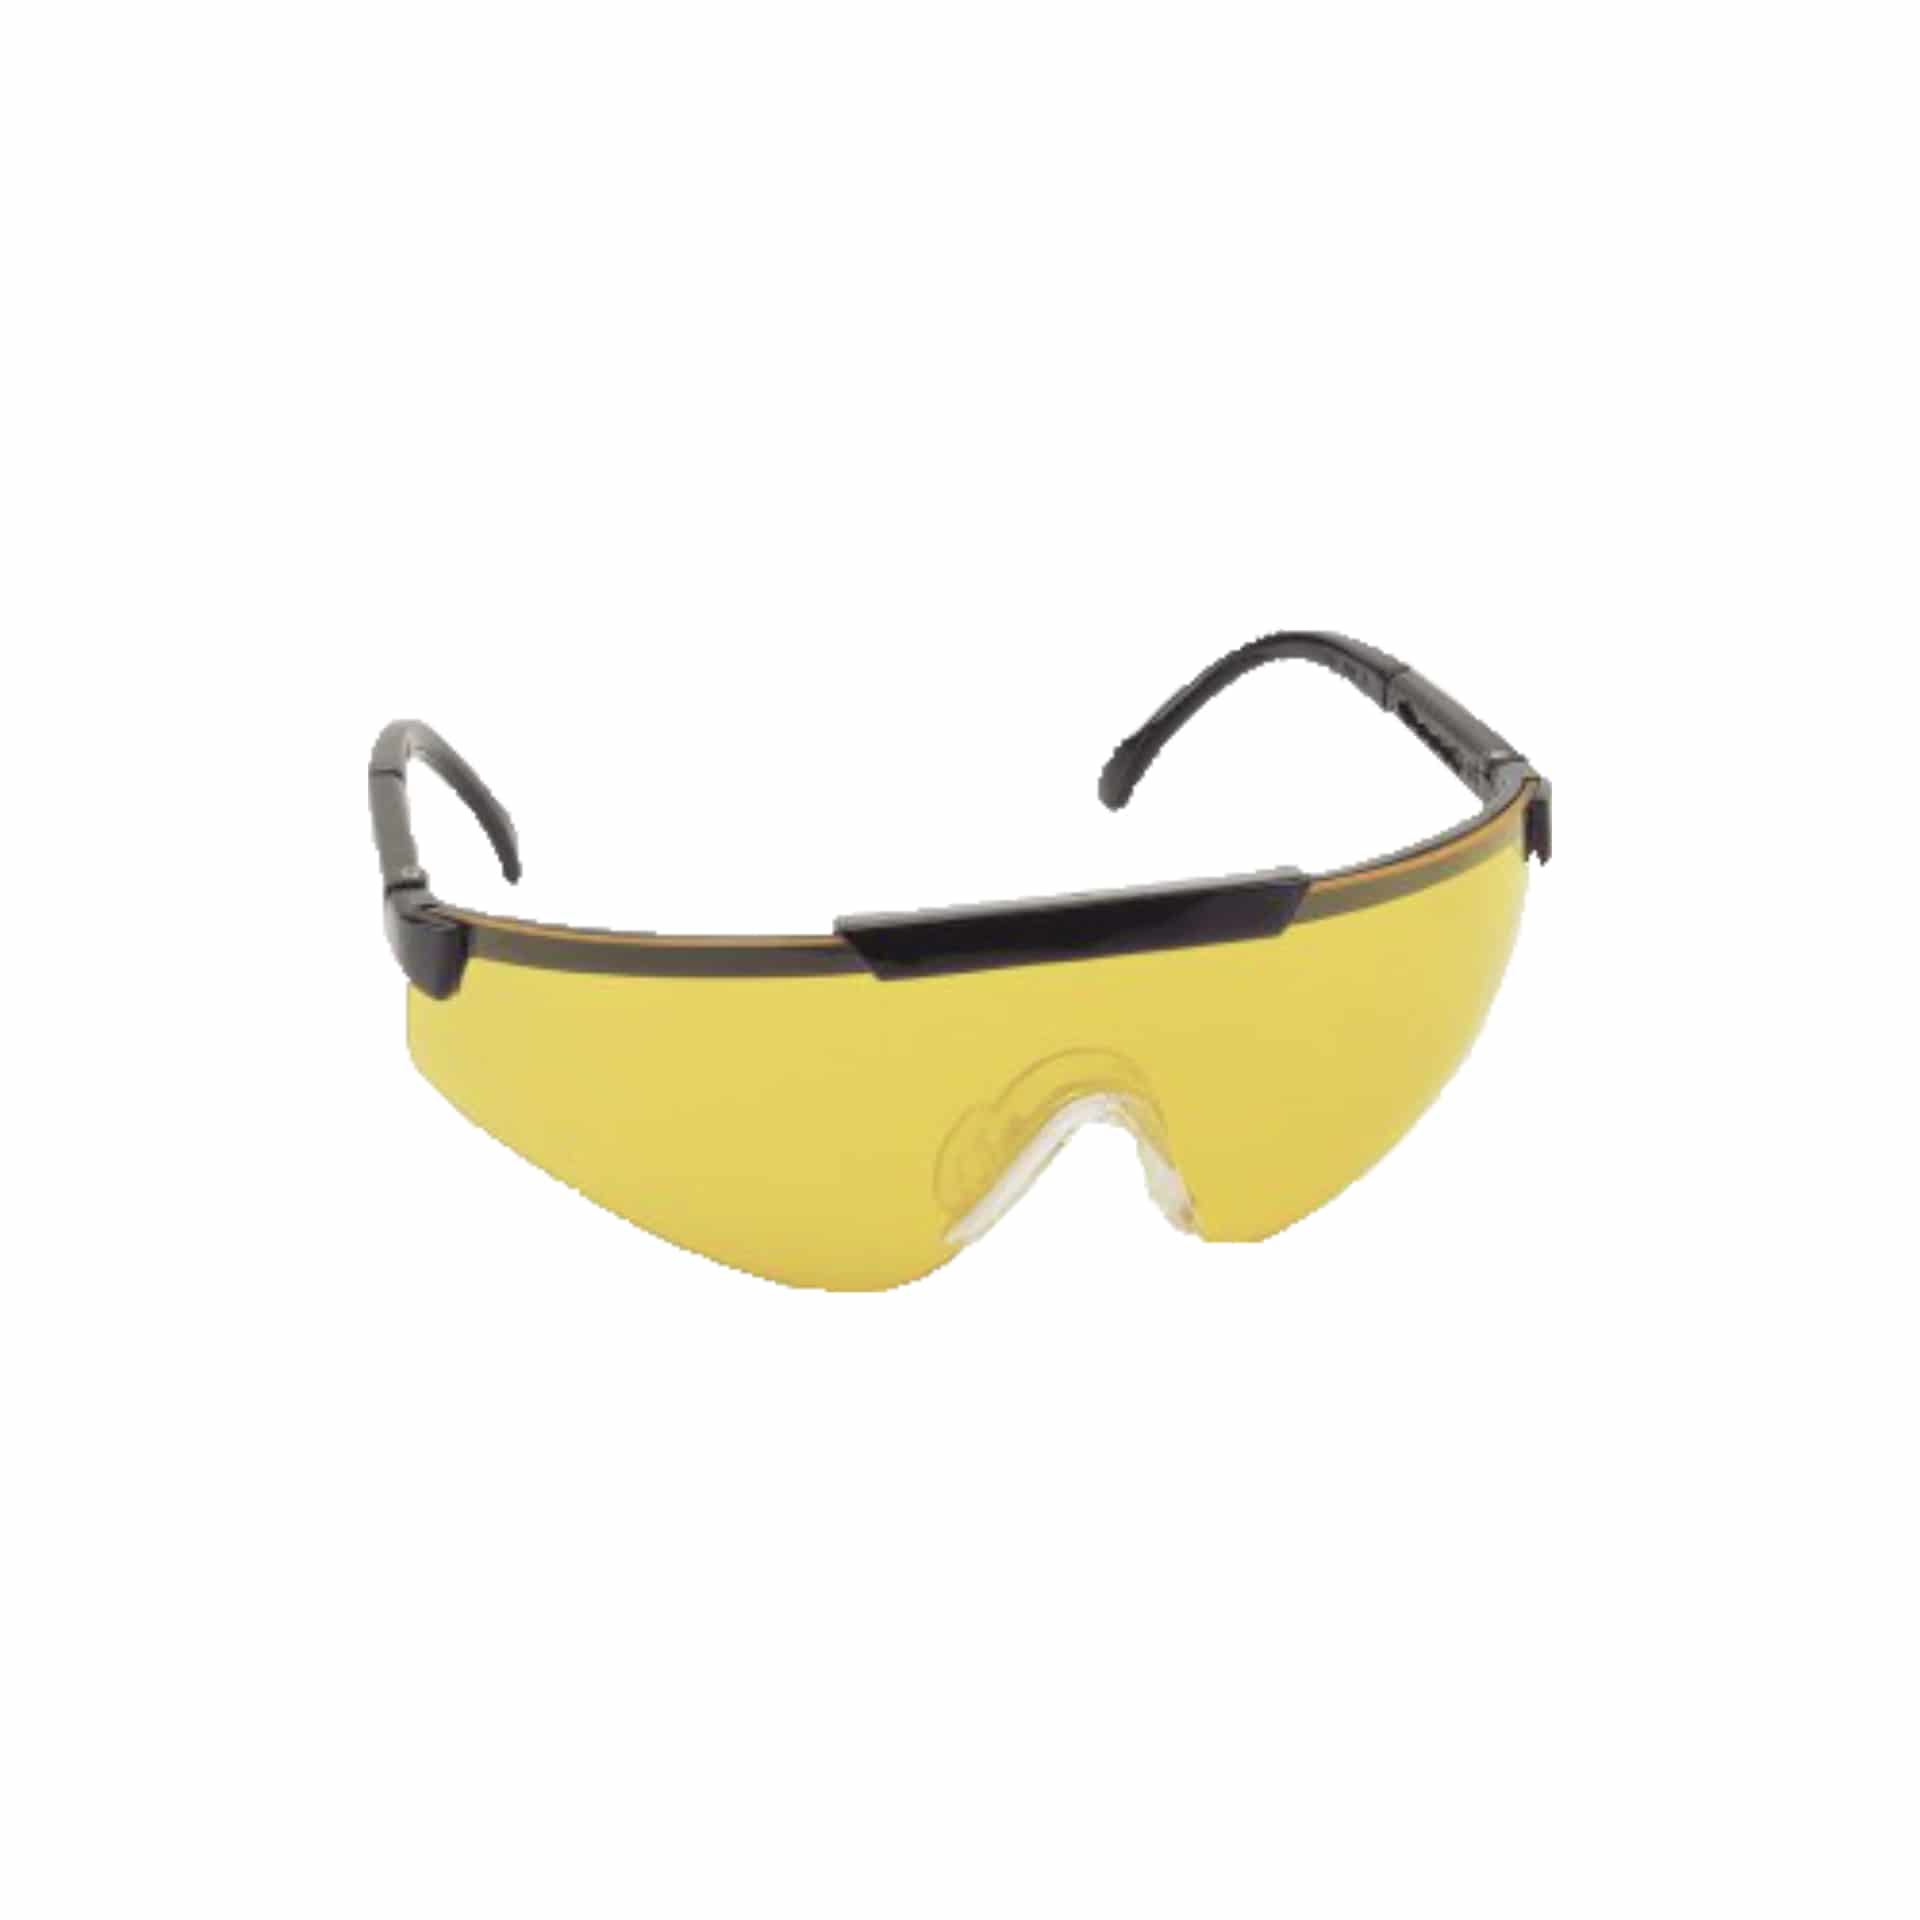 Safety glasses, yellow